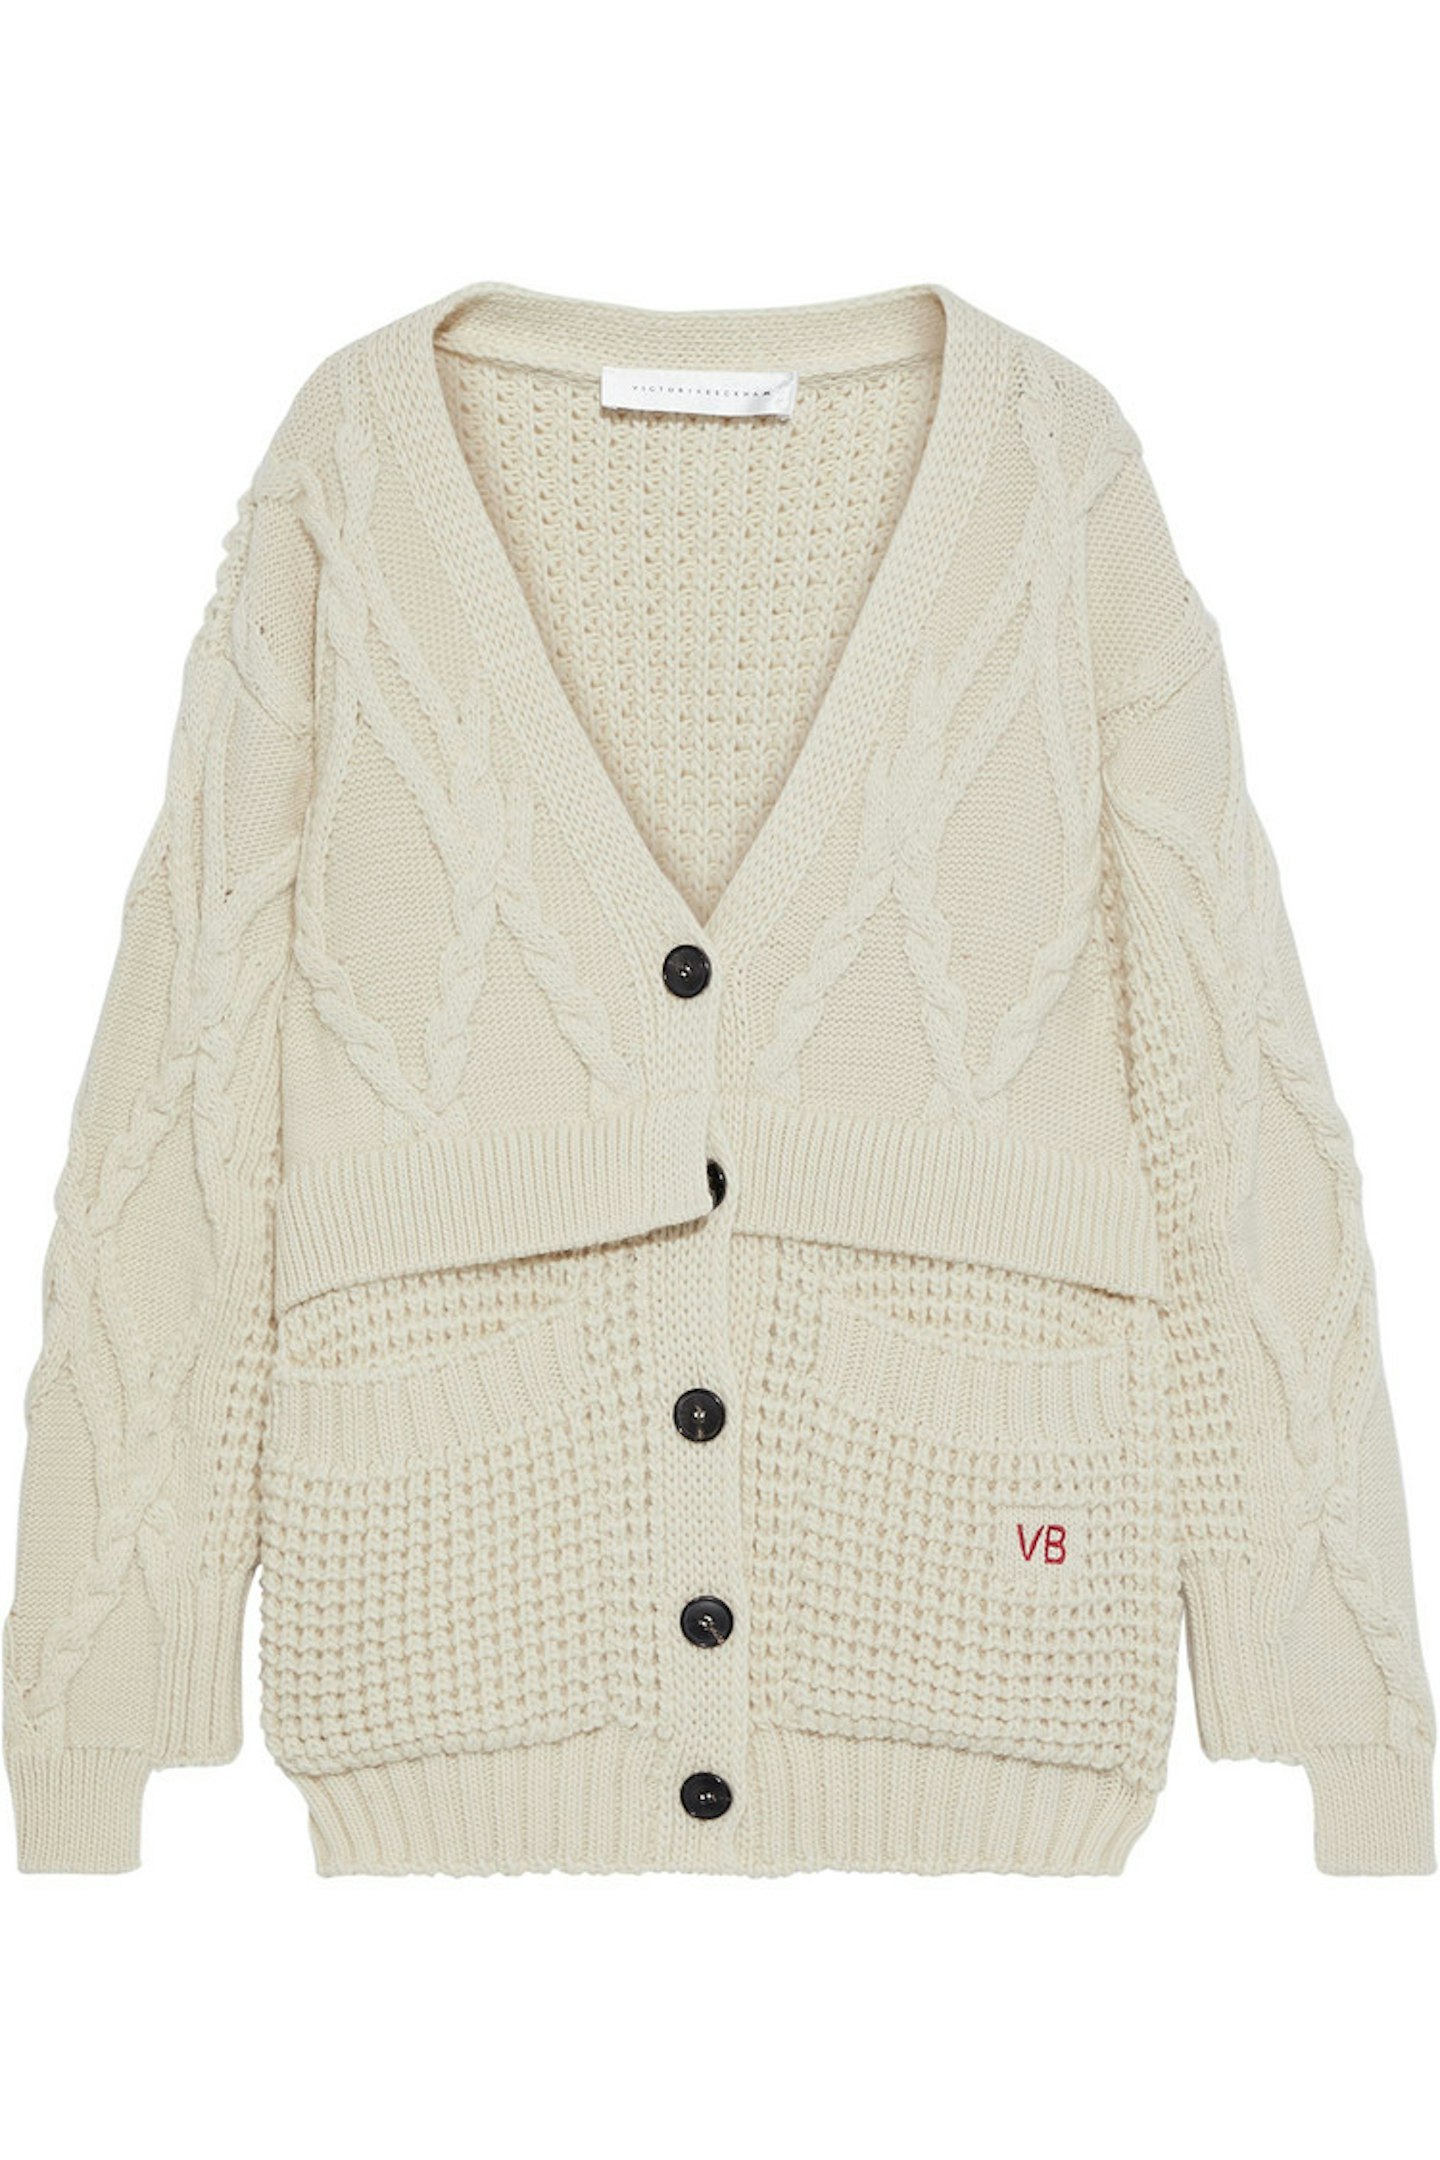 Victoria Beckham at The Outnet, Oversized cable-knit wool cardigan, £499